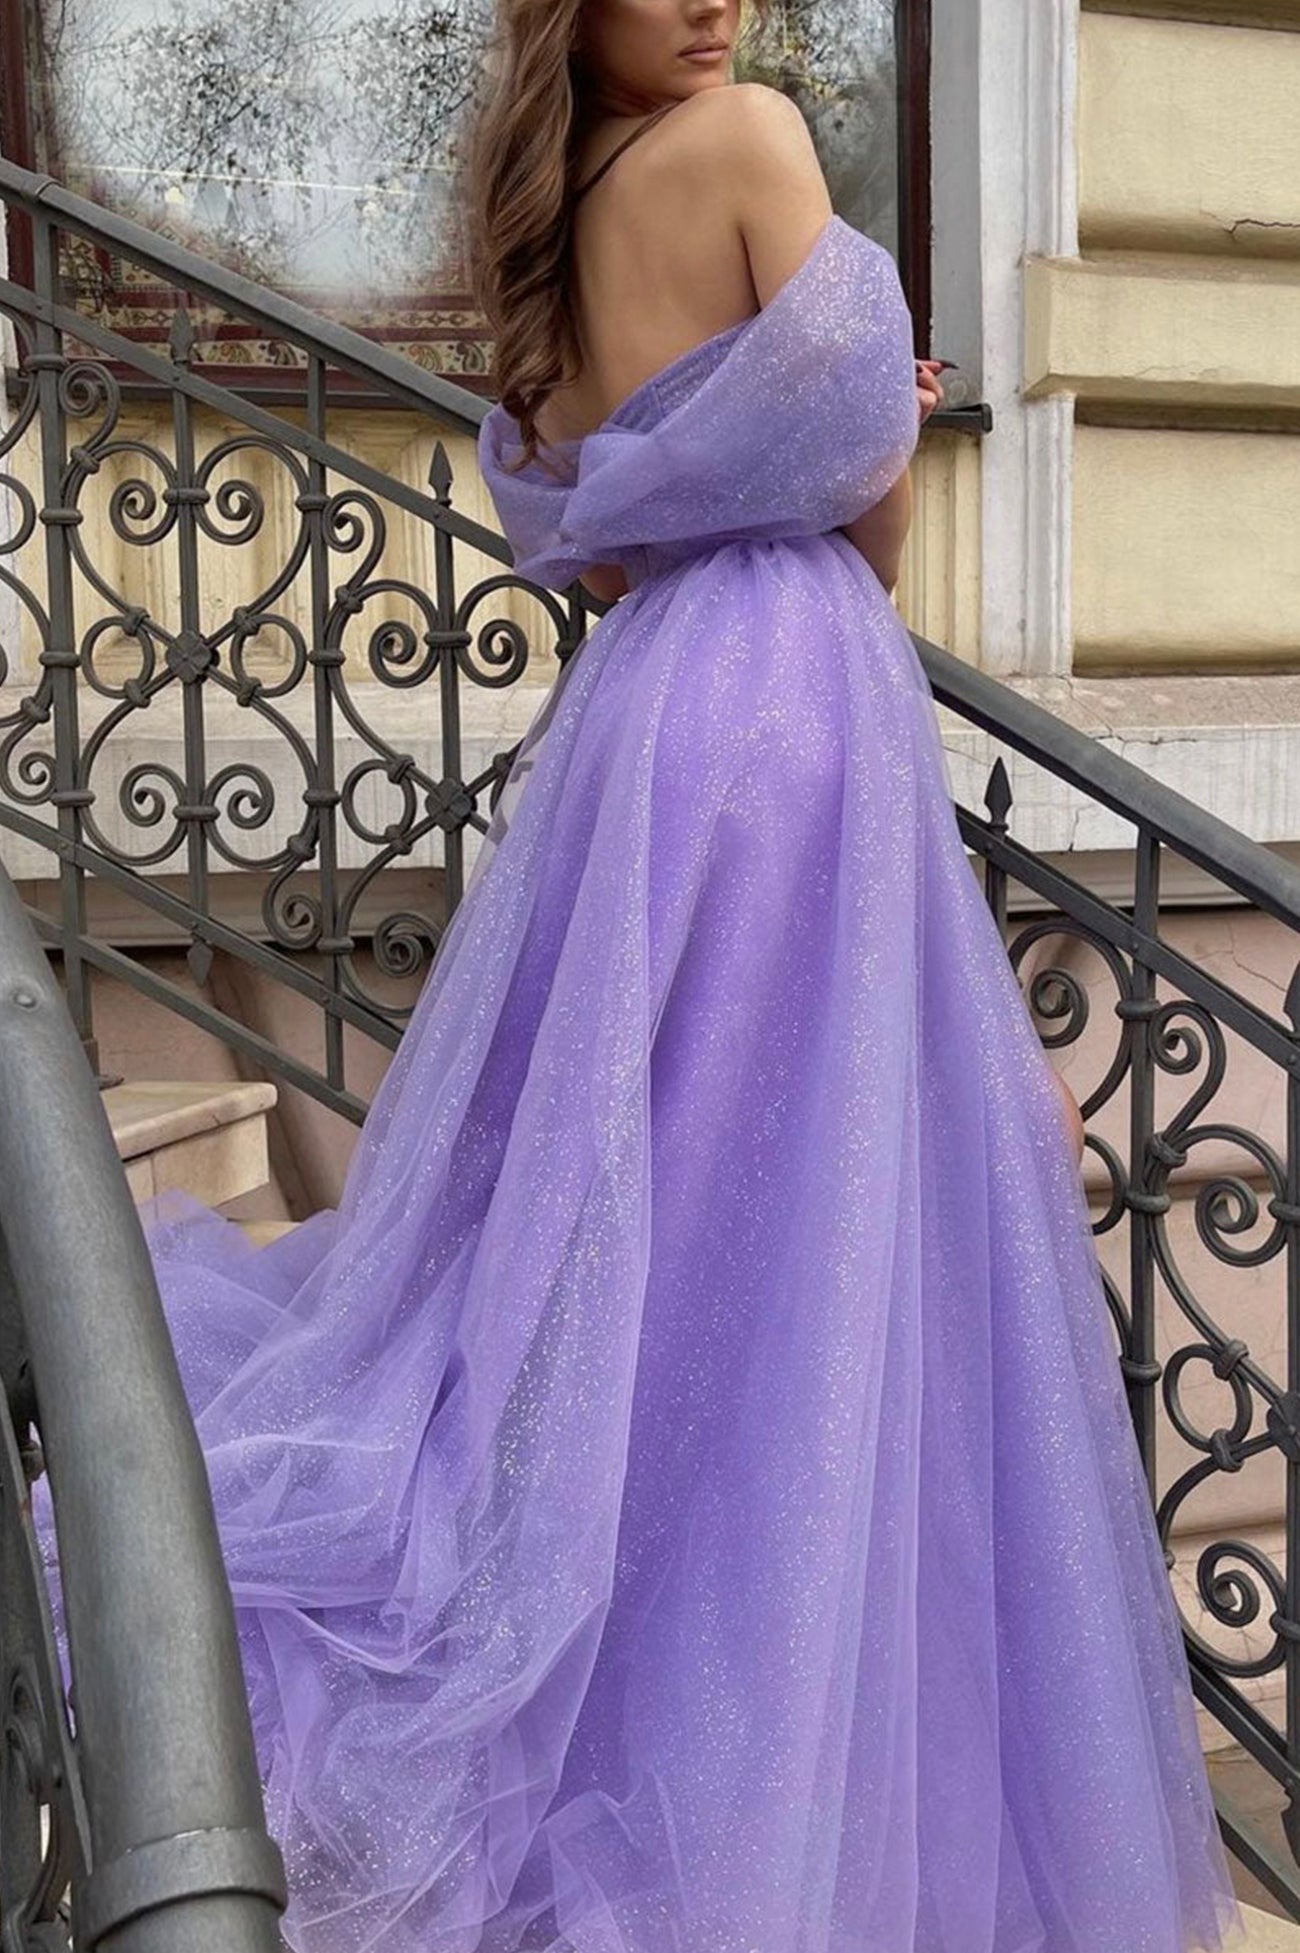 Cheyenne | Purple Tulle Long A-Line Prom Dress Off the Shoulder Evening Party Dress